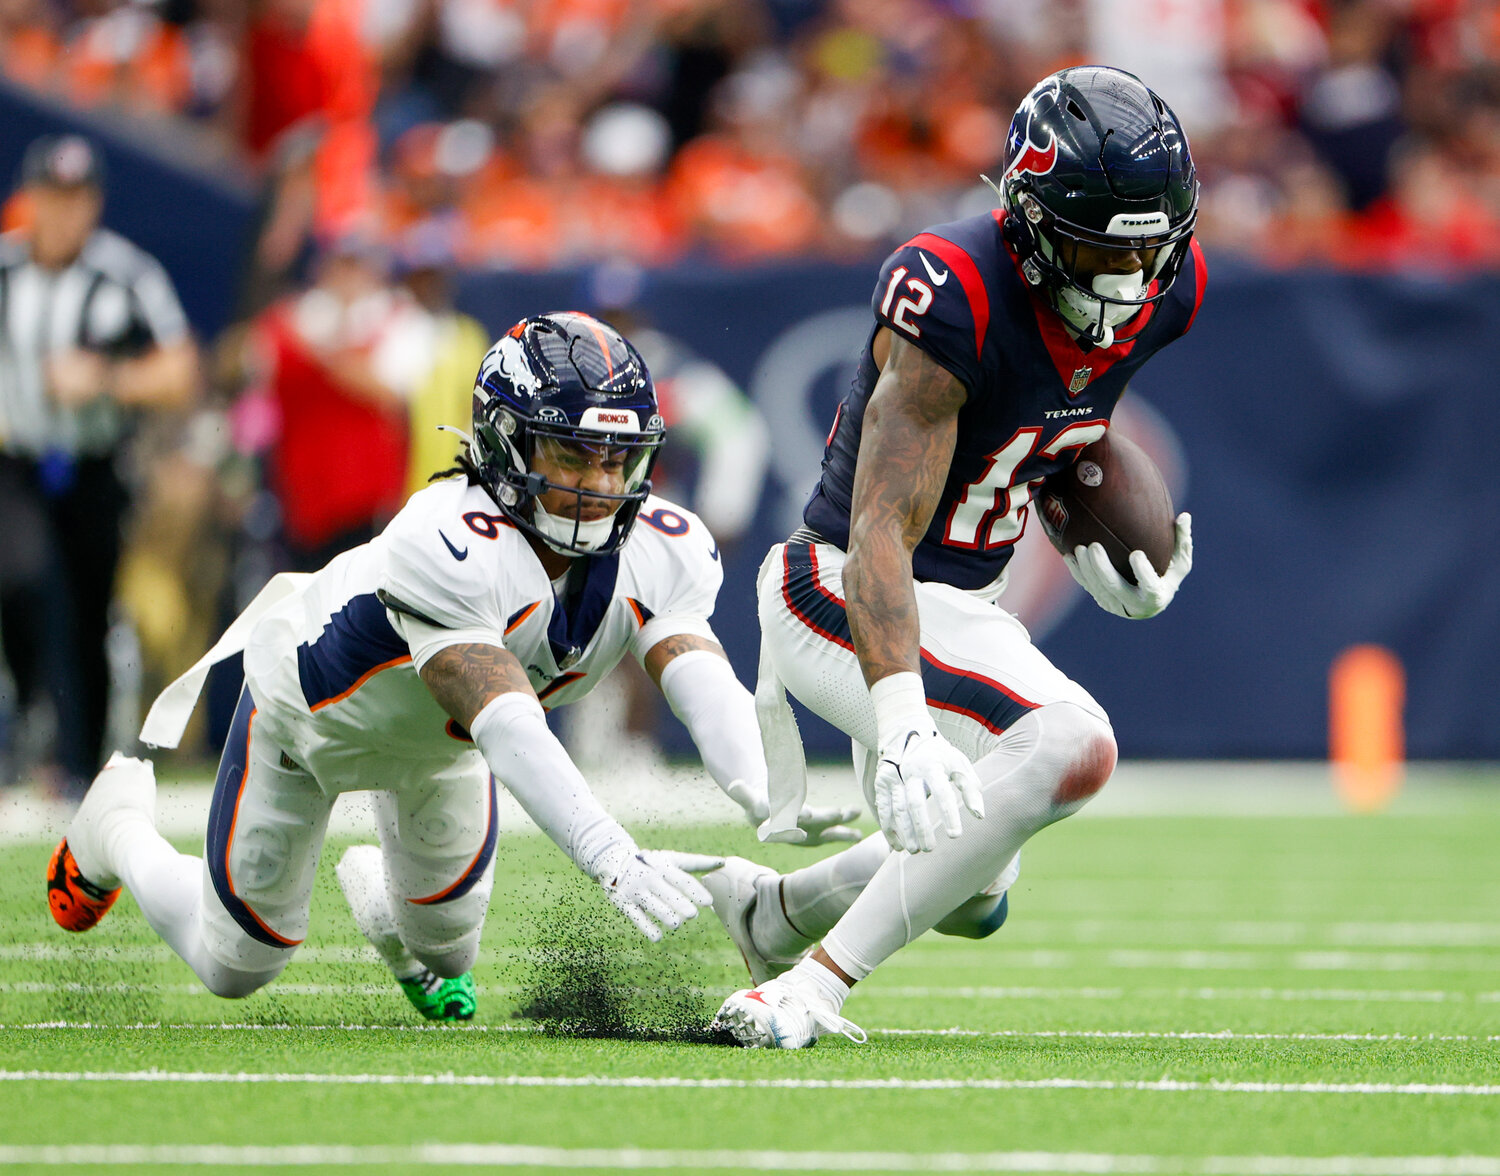 Broncos safety P.J. Locke (6) pushes Texans wide receiver Nico Collins (12) down for a tackle after a catch during an NFL game between the Texans and the Broncos on December 3, 2023 in Houston. The Texans won, 22-17.